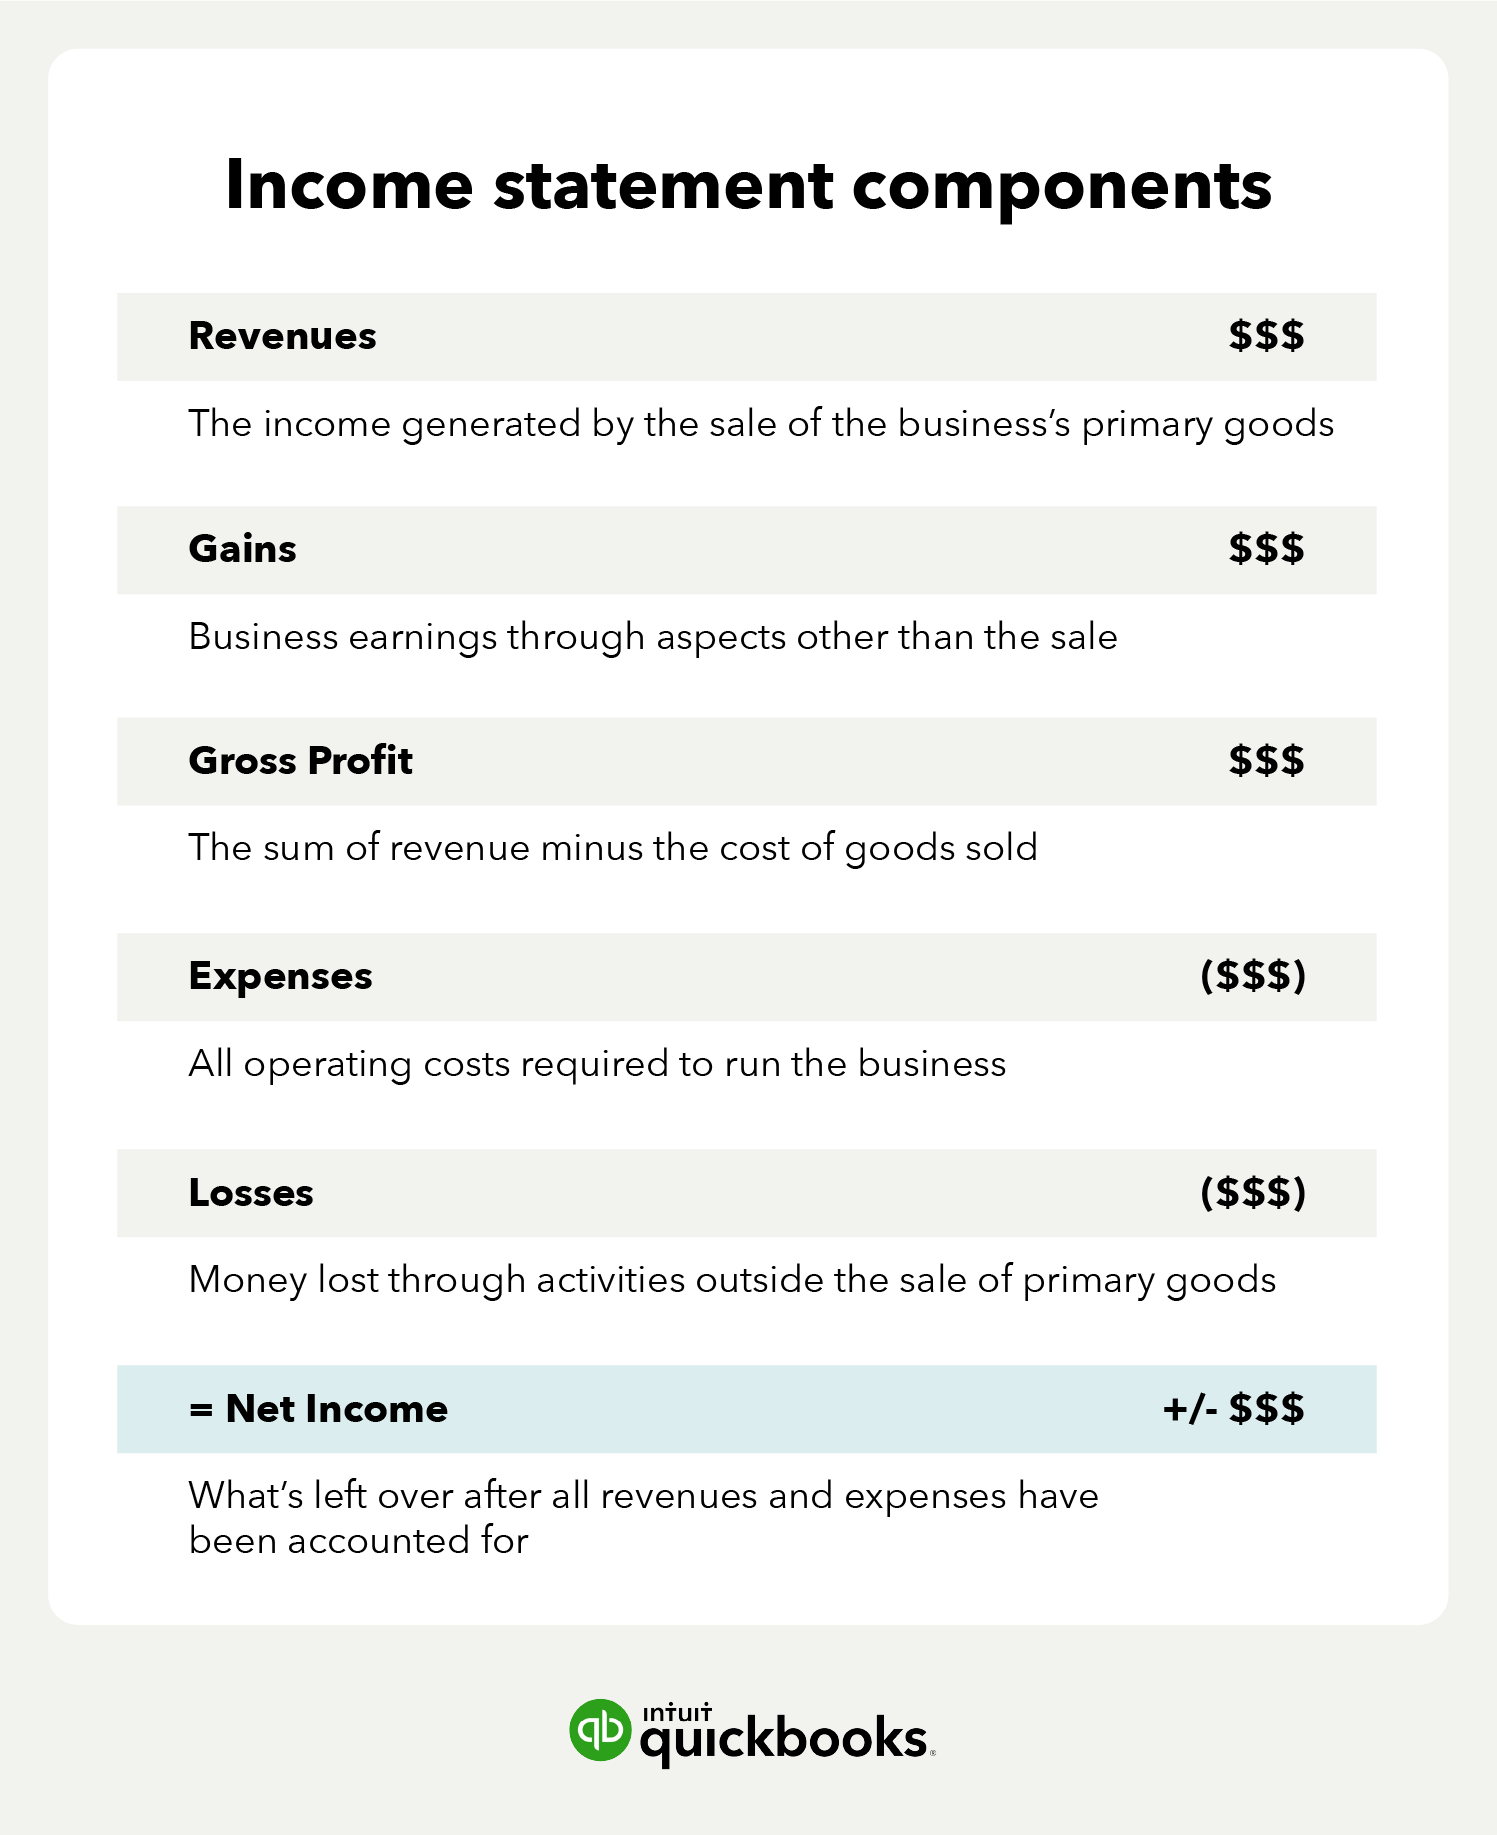 Income statement components include revenues, gains, gross profit, expenses, losses, and net income